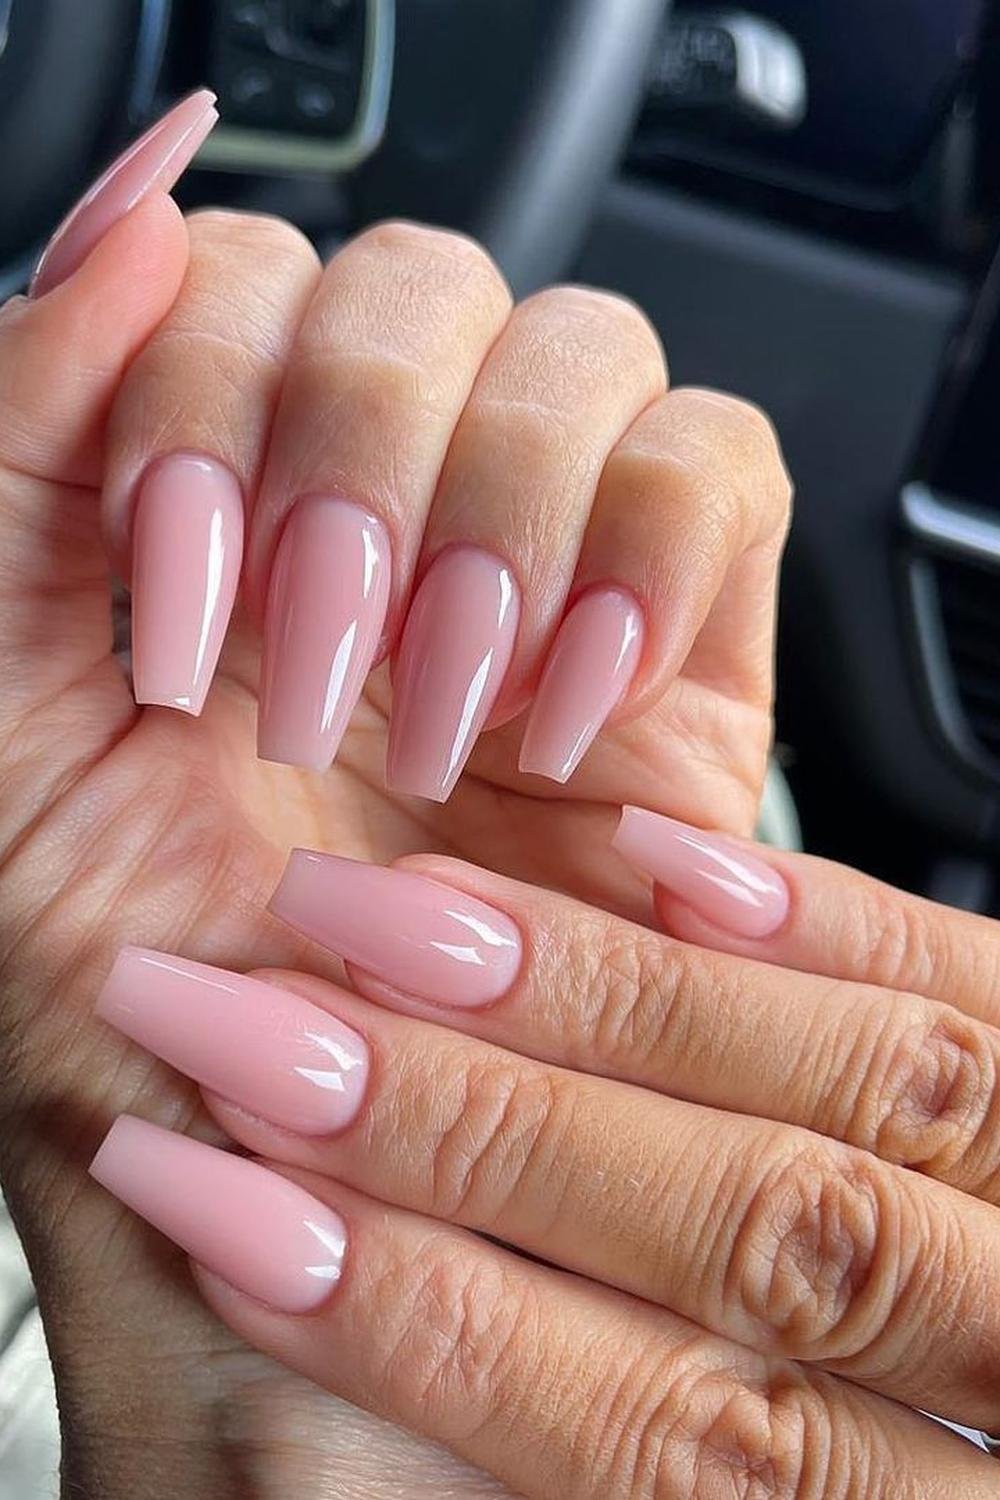 32 - Picture of Ballerina Nails